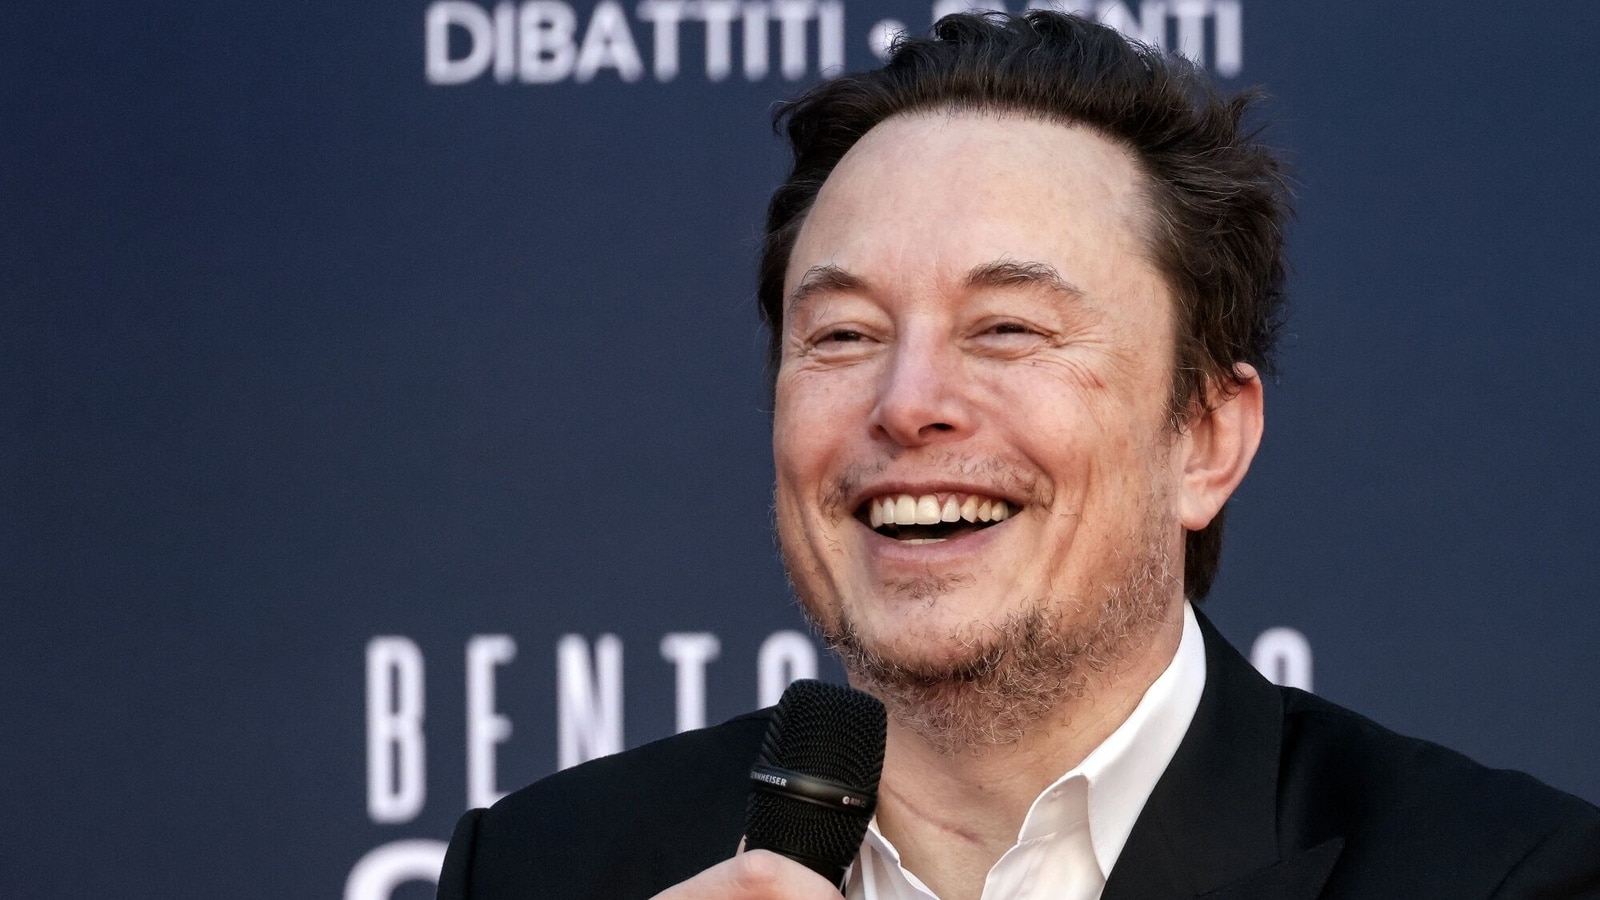 2023 in Review: Elon Musk, Sam Altman to Marc Benioff, Top CEO Mishaps and Misadventures